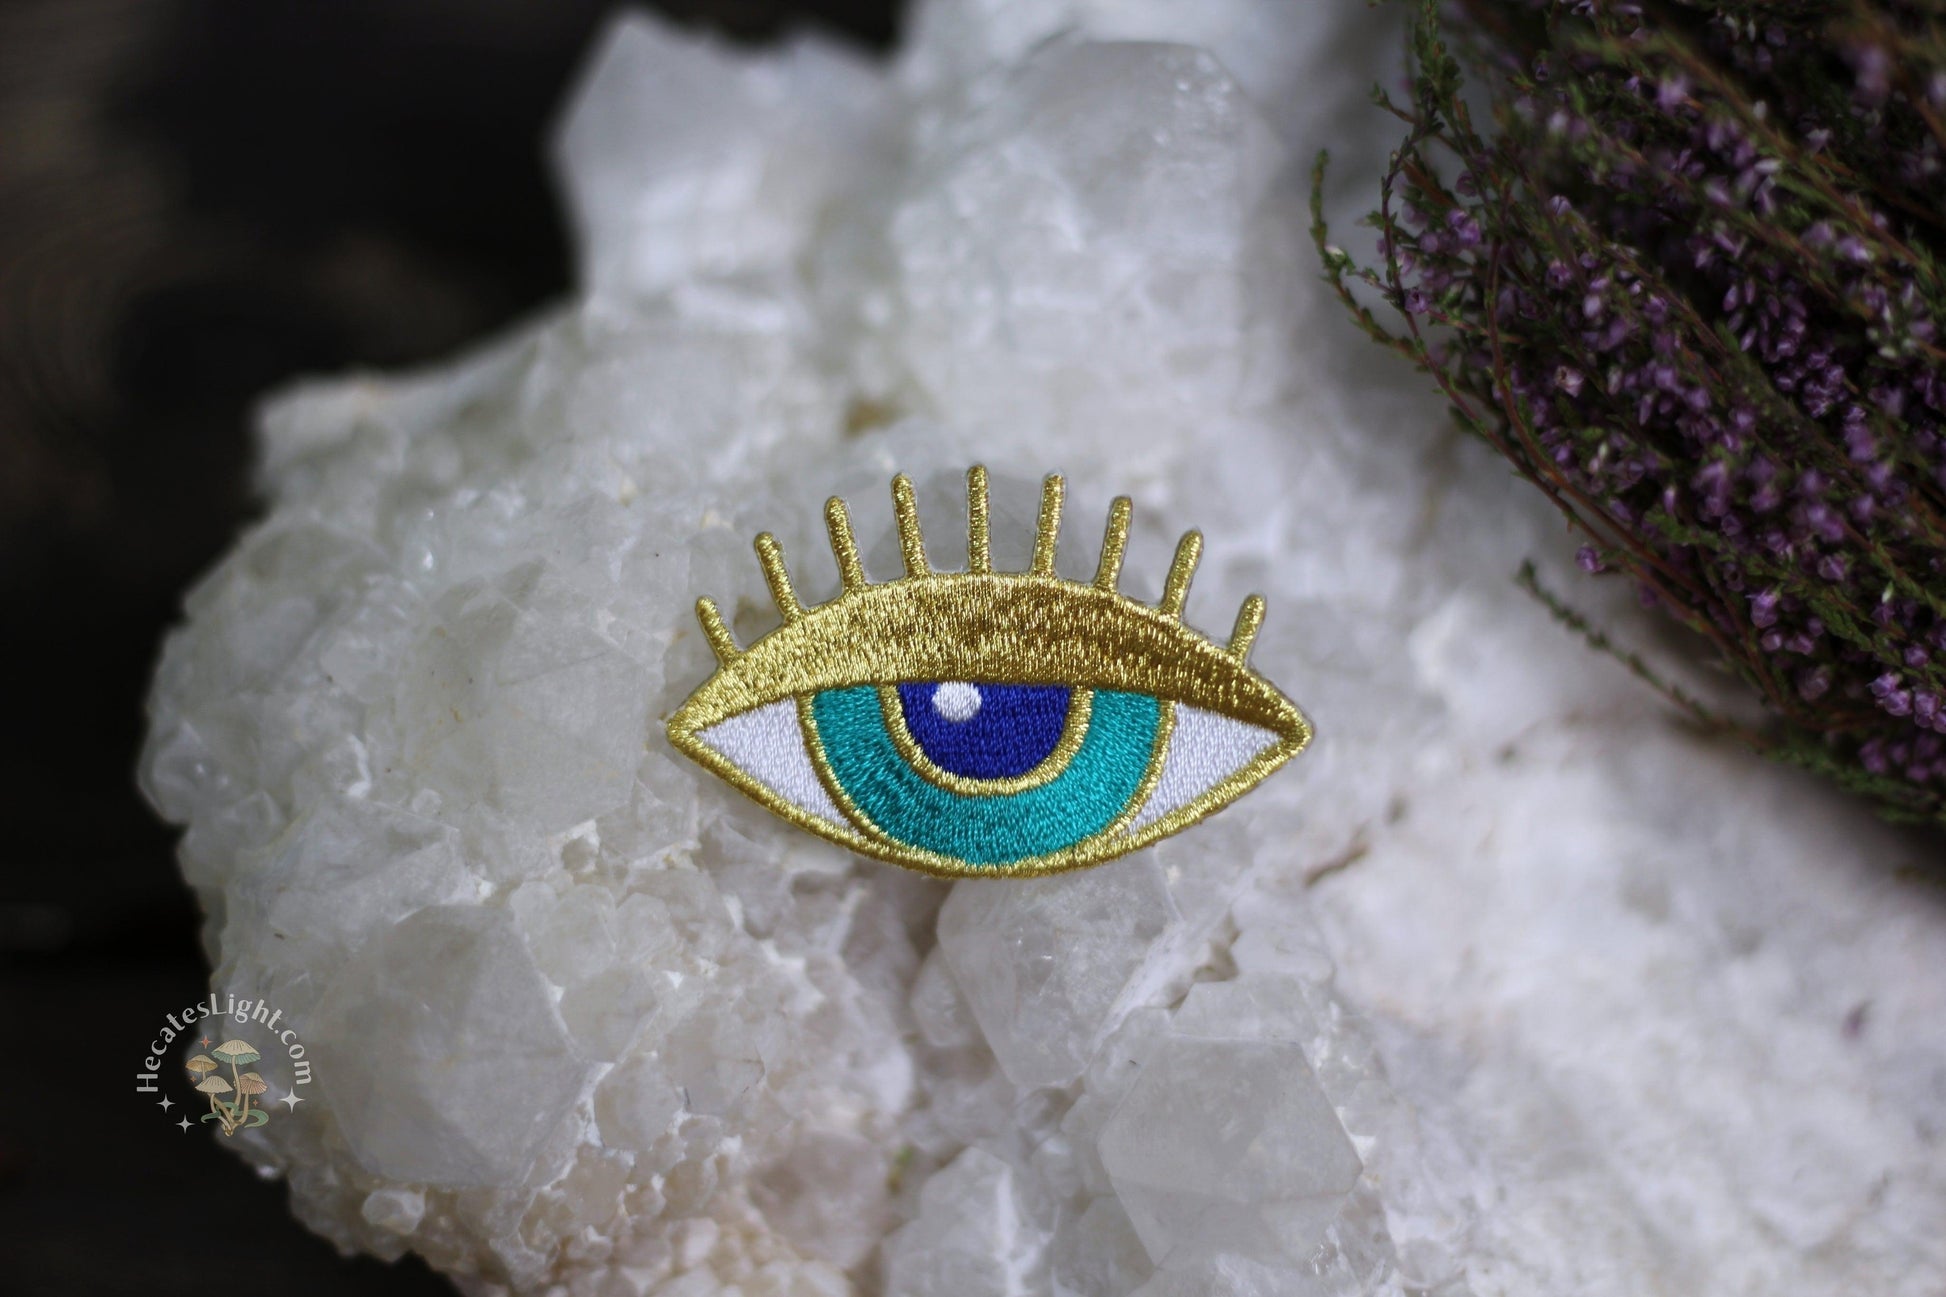 Gold Eye Patch MALICIEUSE alberta, blue, calgary, canada, cloth, clothing, cotton, decor, decorative, eye, gold, iron, iron-on, magic, patch, t shirt, thermocollant, witchy clothing metaphysical occult supplies witchy hecateslight.com witchcraft cottagecore witch gifts